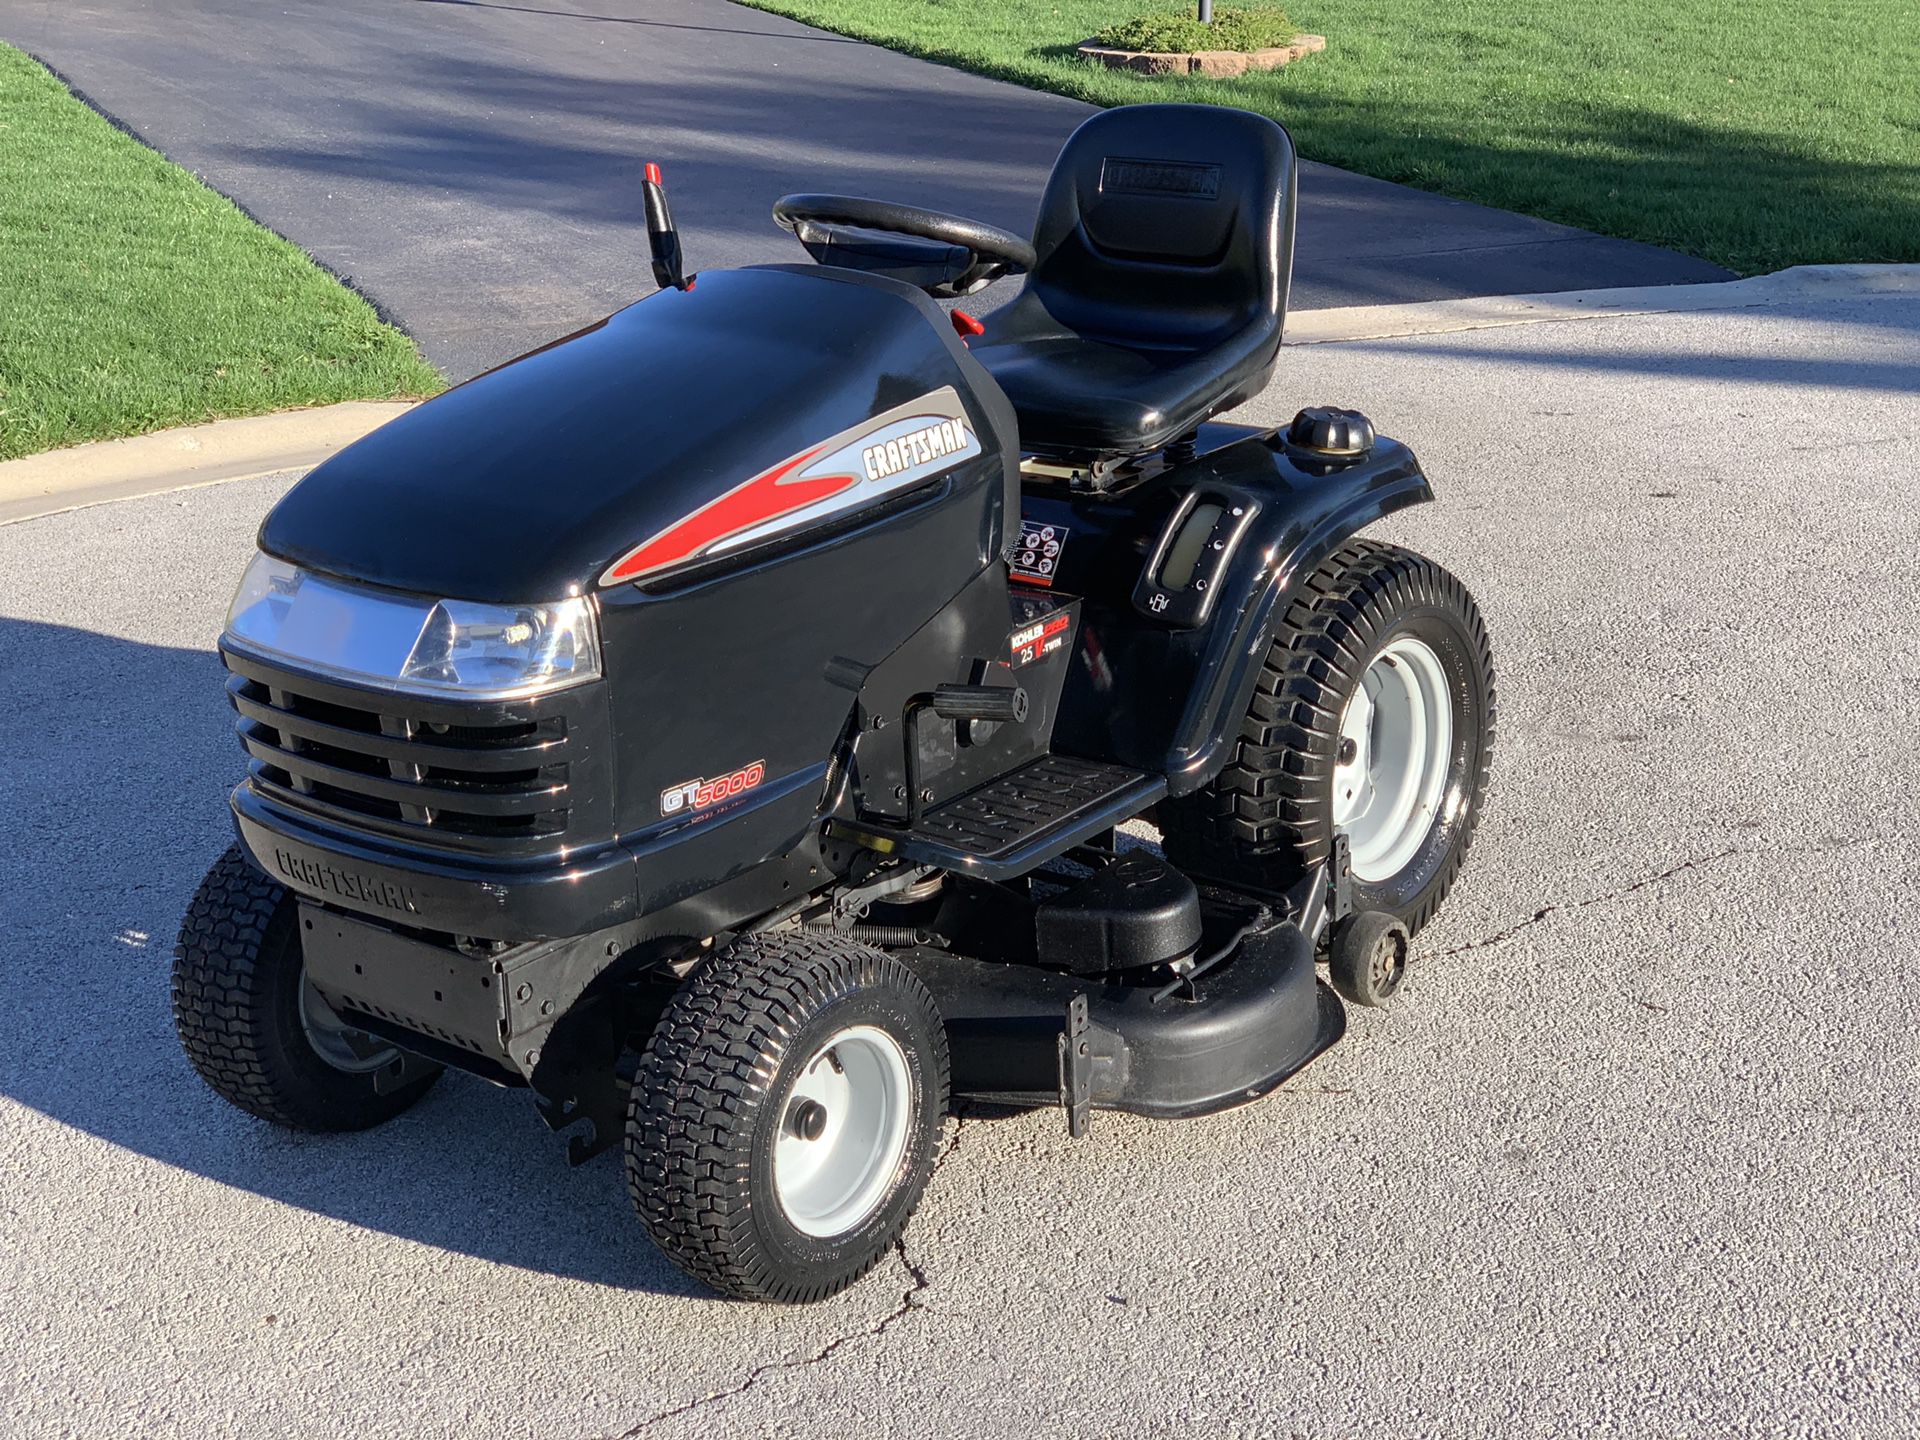 Craftsman Riding Mower Lawn Tractor GT5000, 25HP